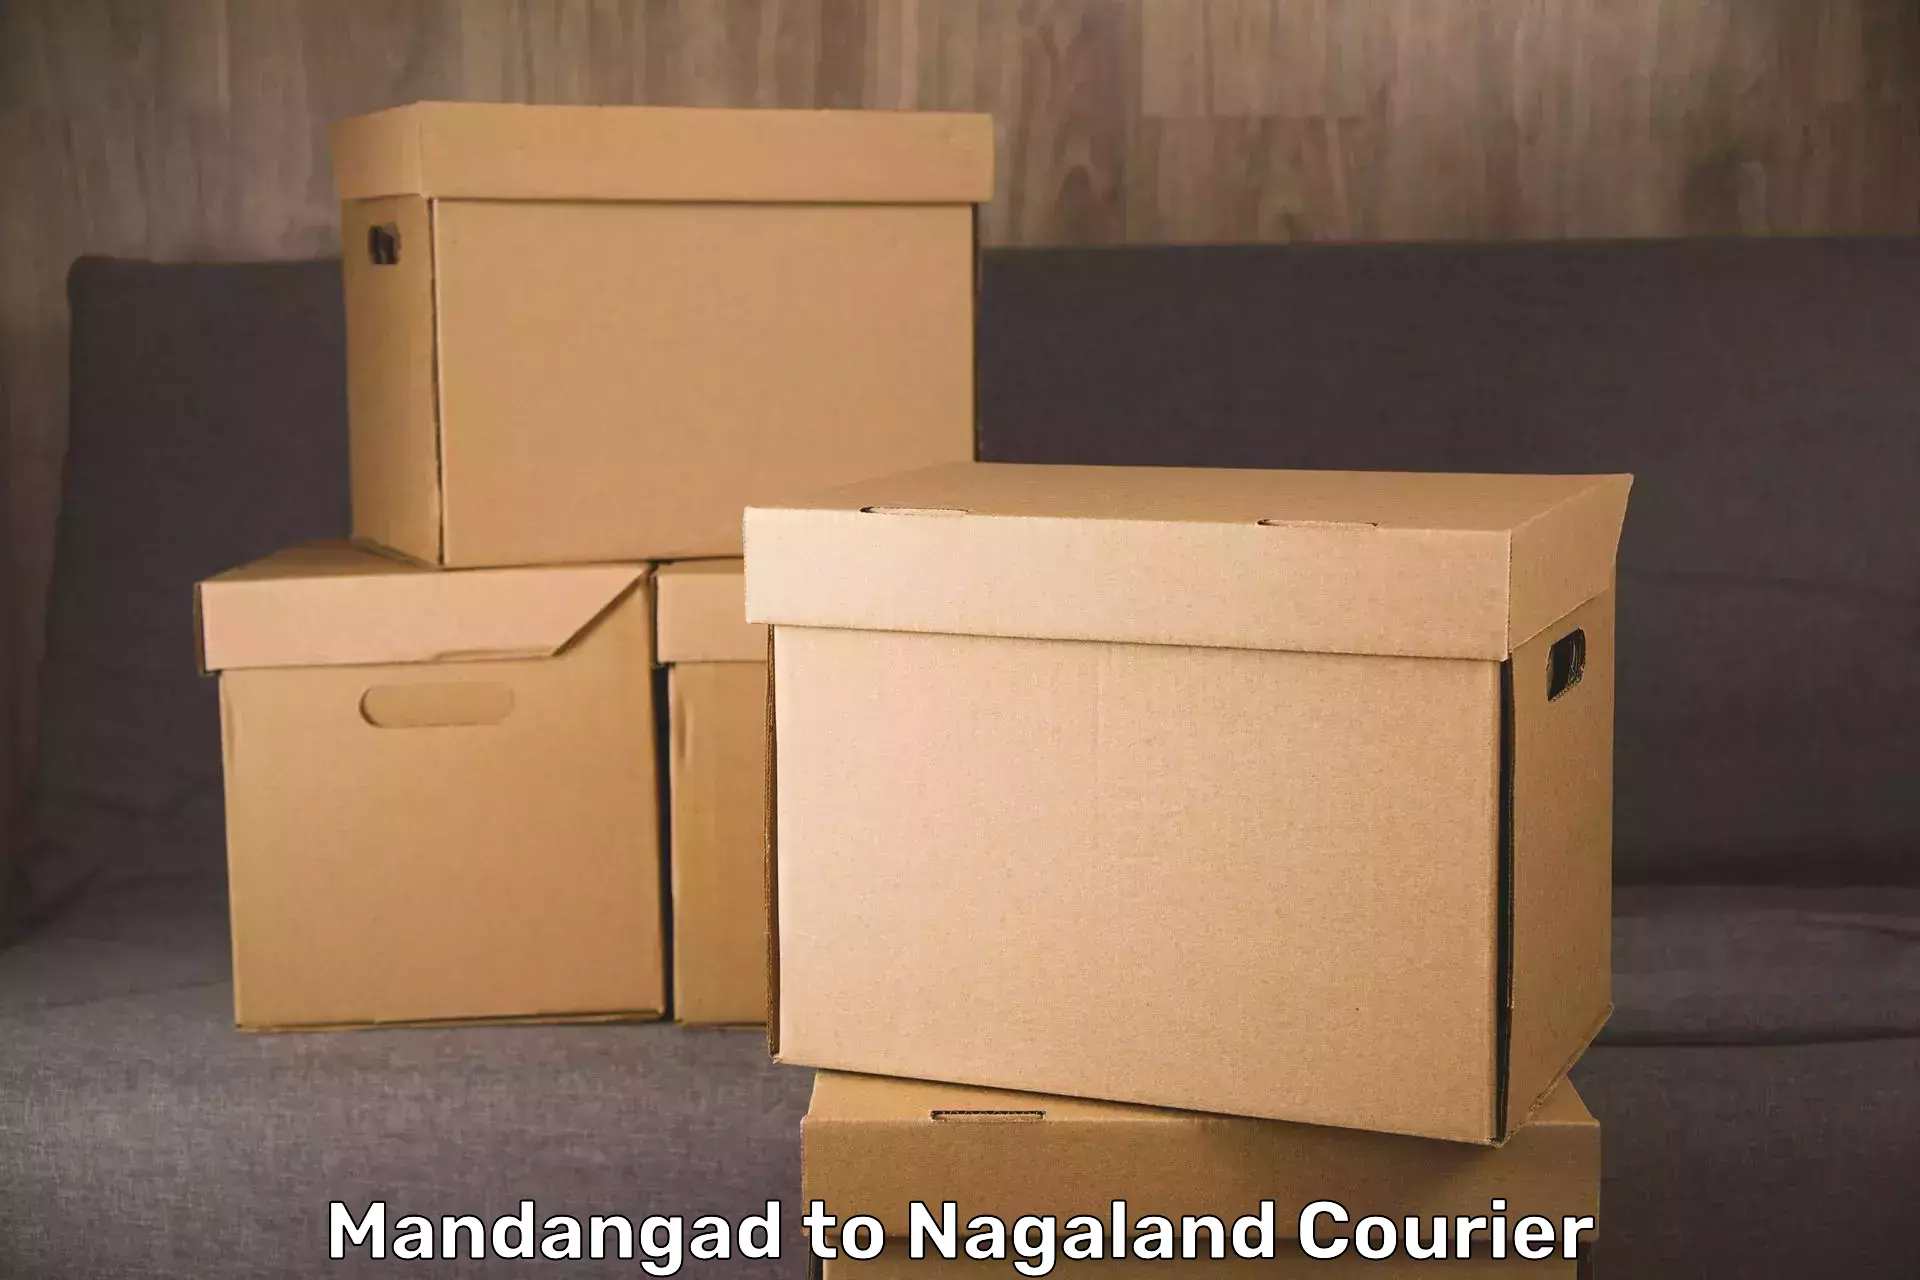 Luggage delivery network Mandangad to Nagaland